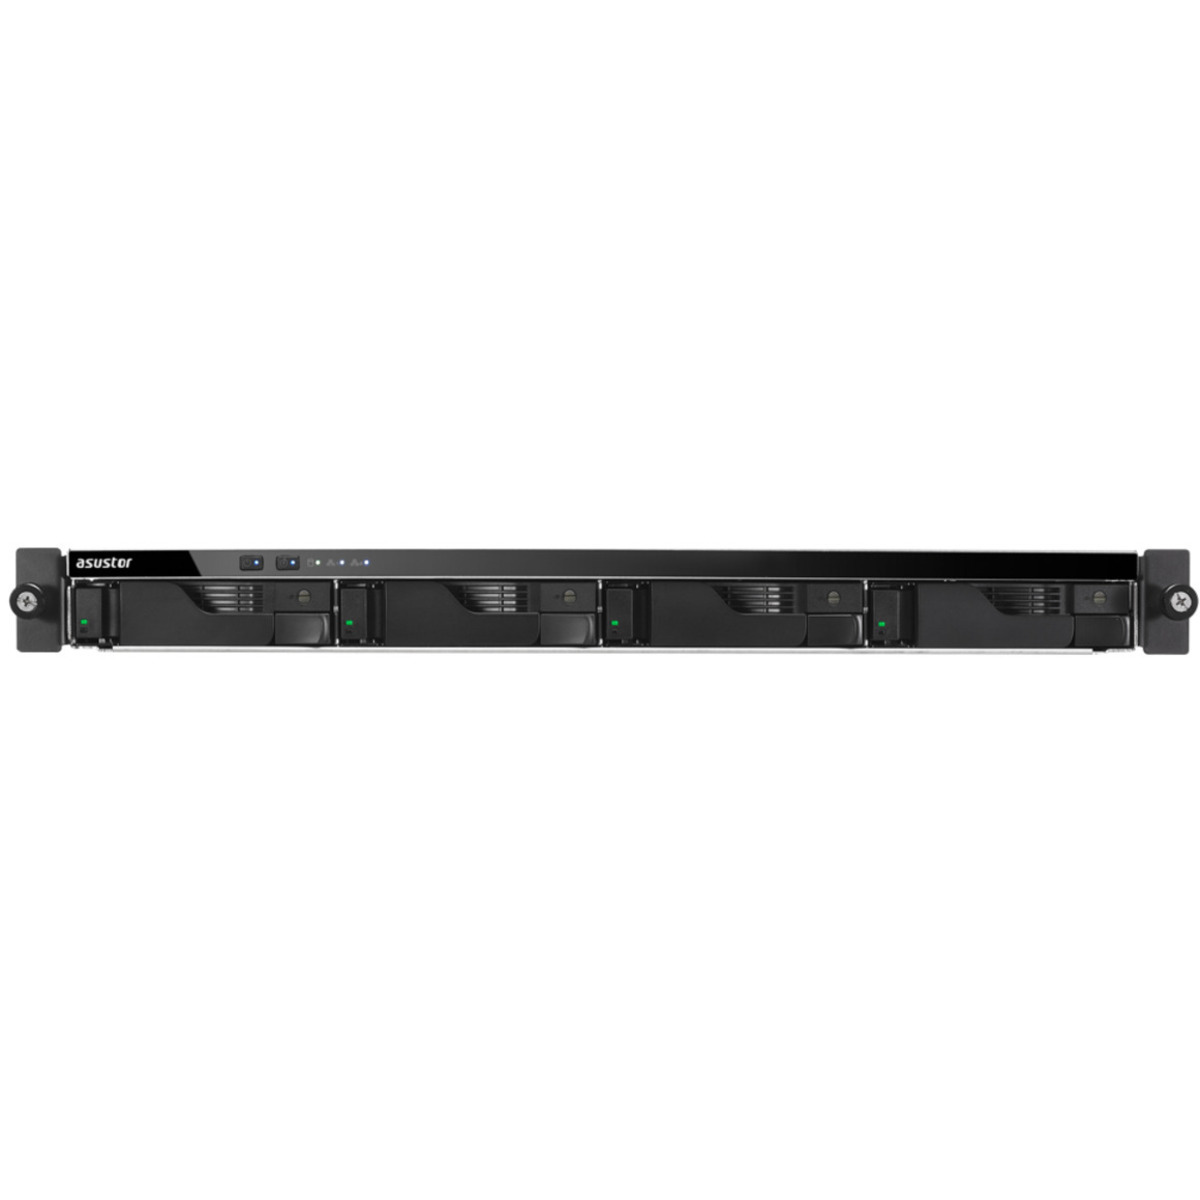 buy $2863 ASUSTOR LOCKERSTOR 4RS AS6504RS 80tb RackMount NAS - Network Attached Storage Device 4x20000gb Seagate EXOS X20 ST20000NM007D 3.5 7200rpm SATA 6Gb/s HDD ENTERPRISE Class Drives Installed - Burn-In Tested - FREE RAM UPGRADE - nas headquarters buy network attached storage server device das new raid-5 free shipping simply usa LOCKERSTOR 4RS AS6504RS